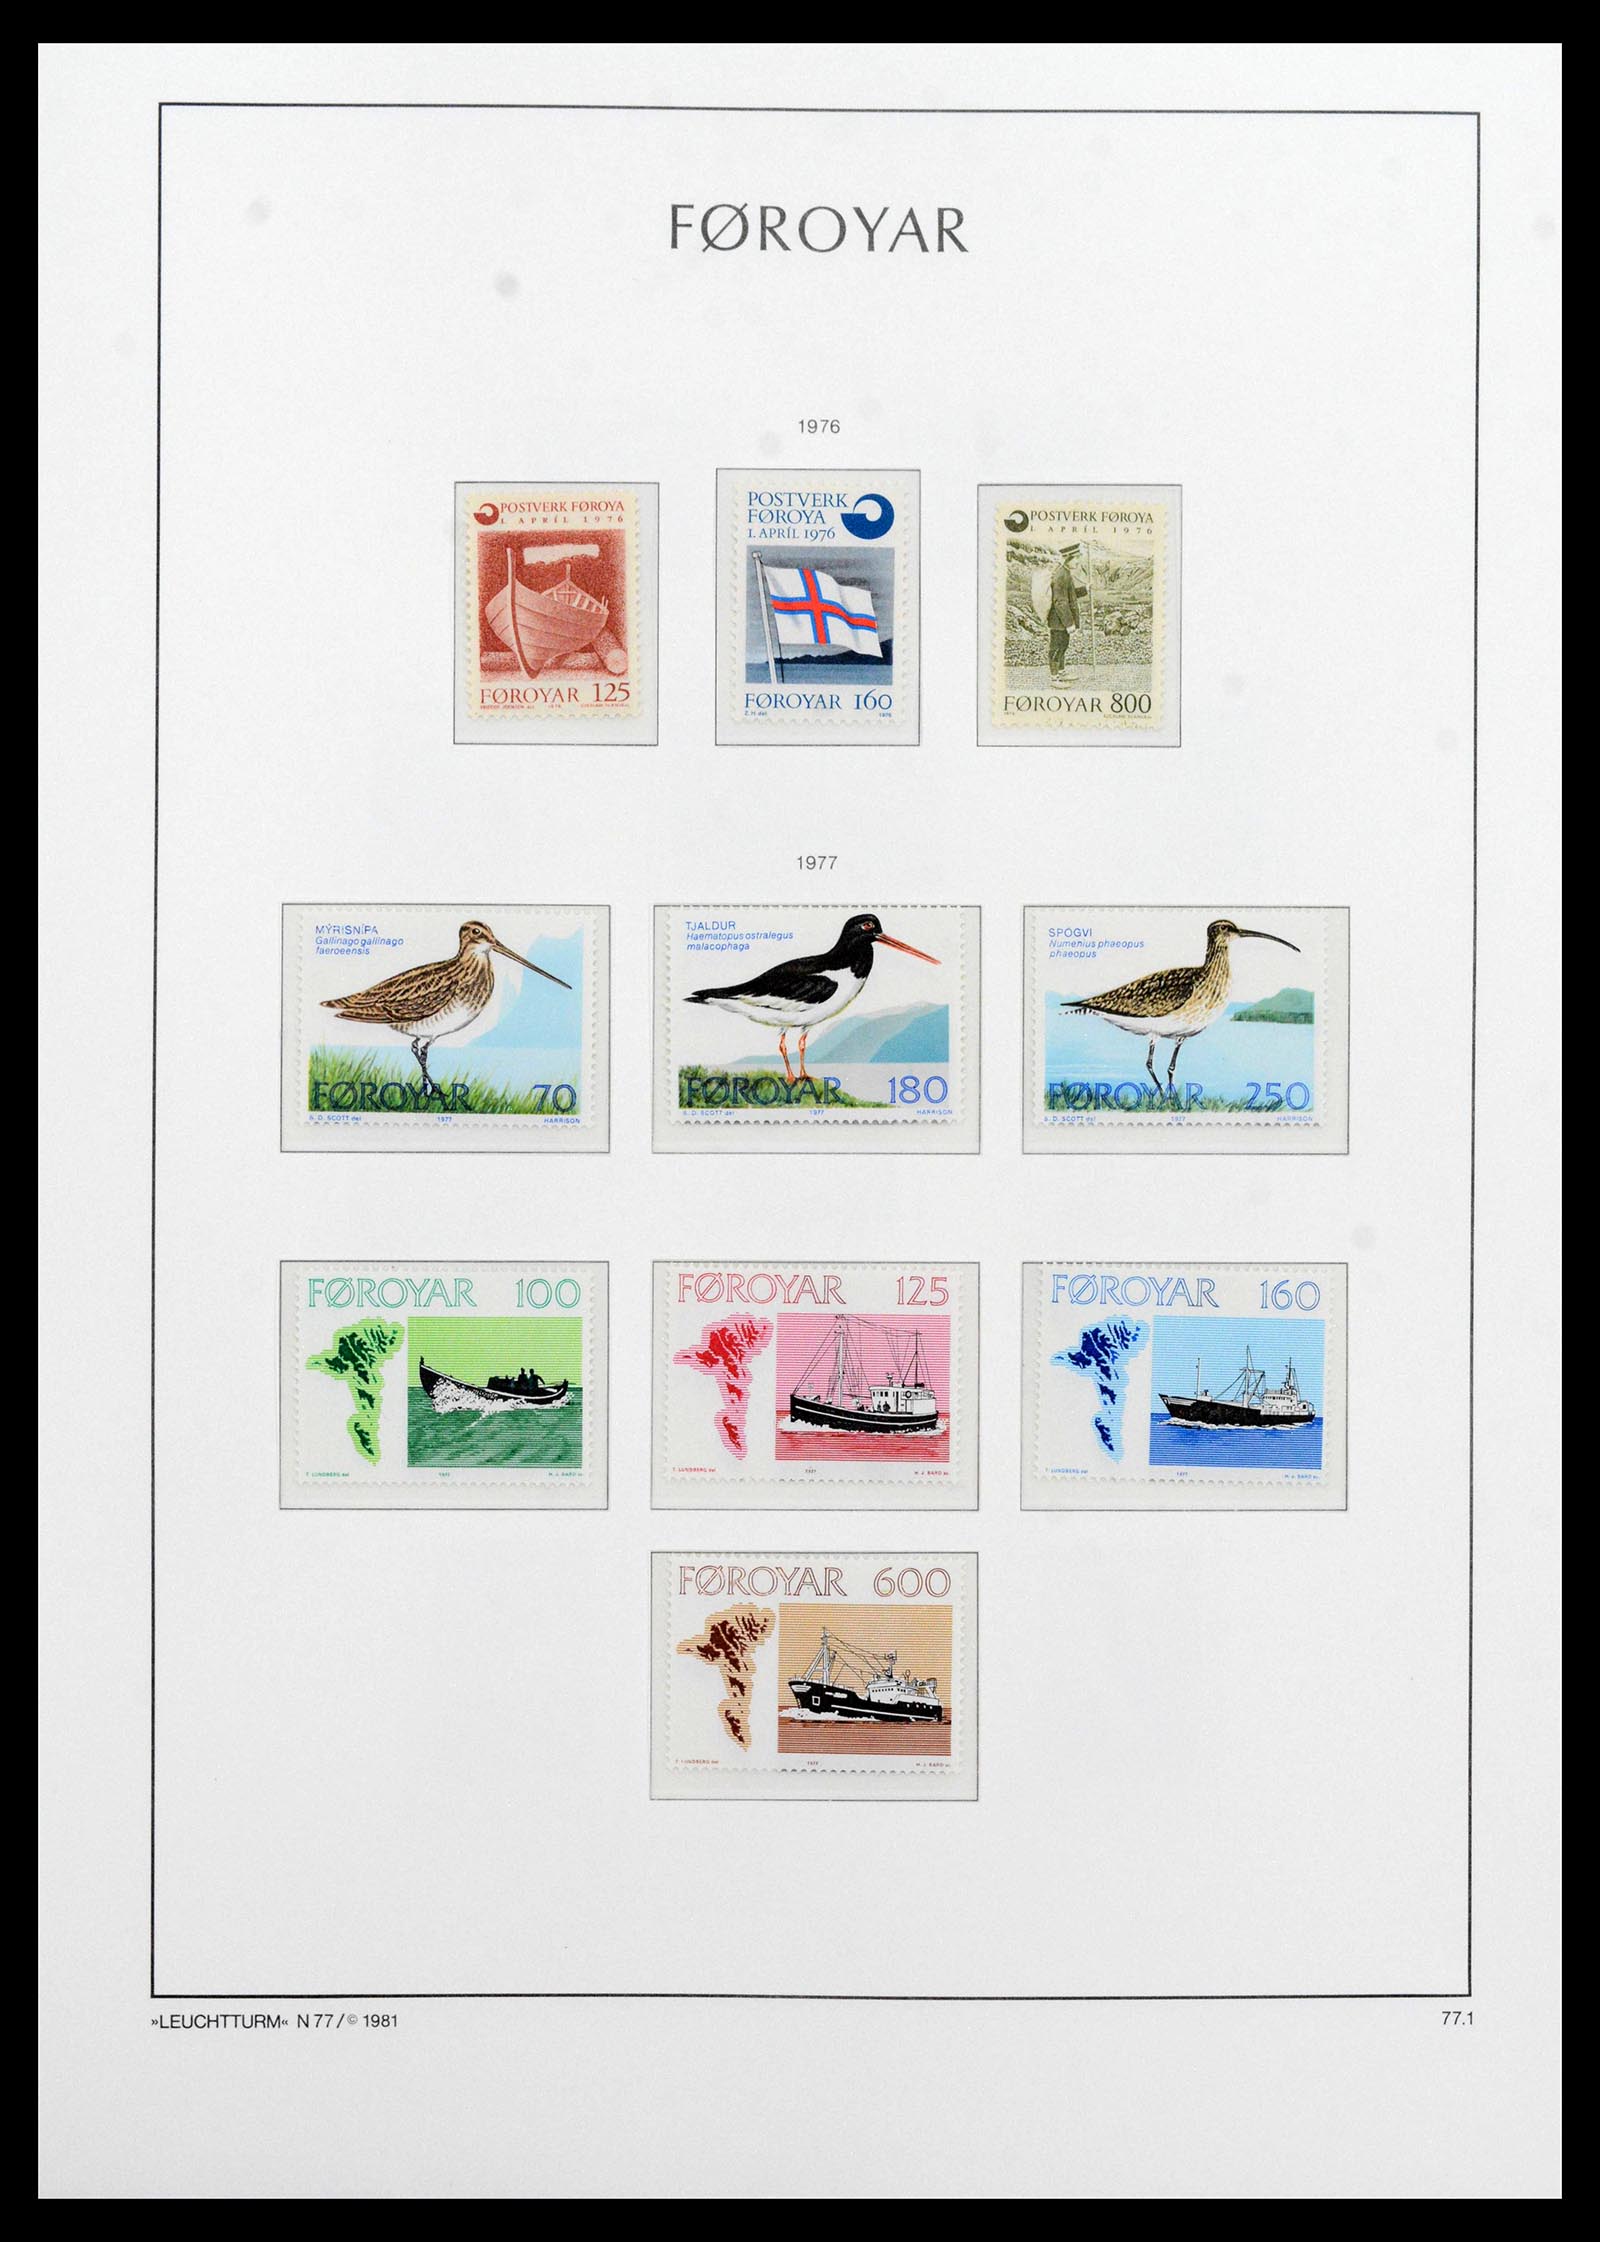 39021 0003 - Stamp collection 39021 Faroe islands 1940-2000.